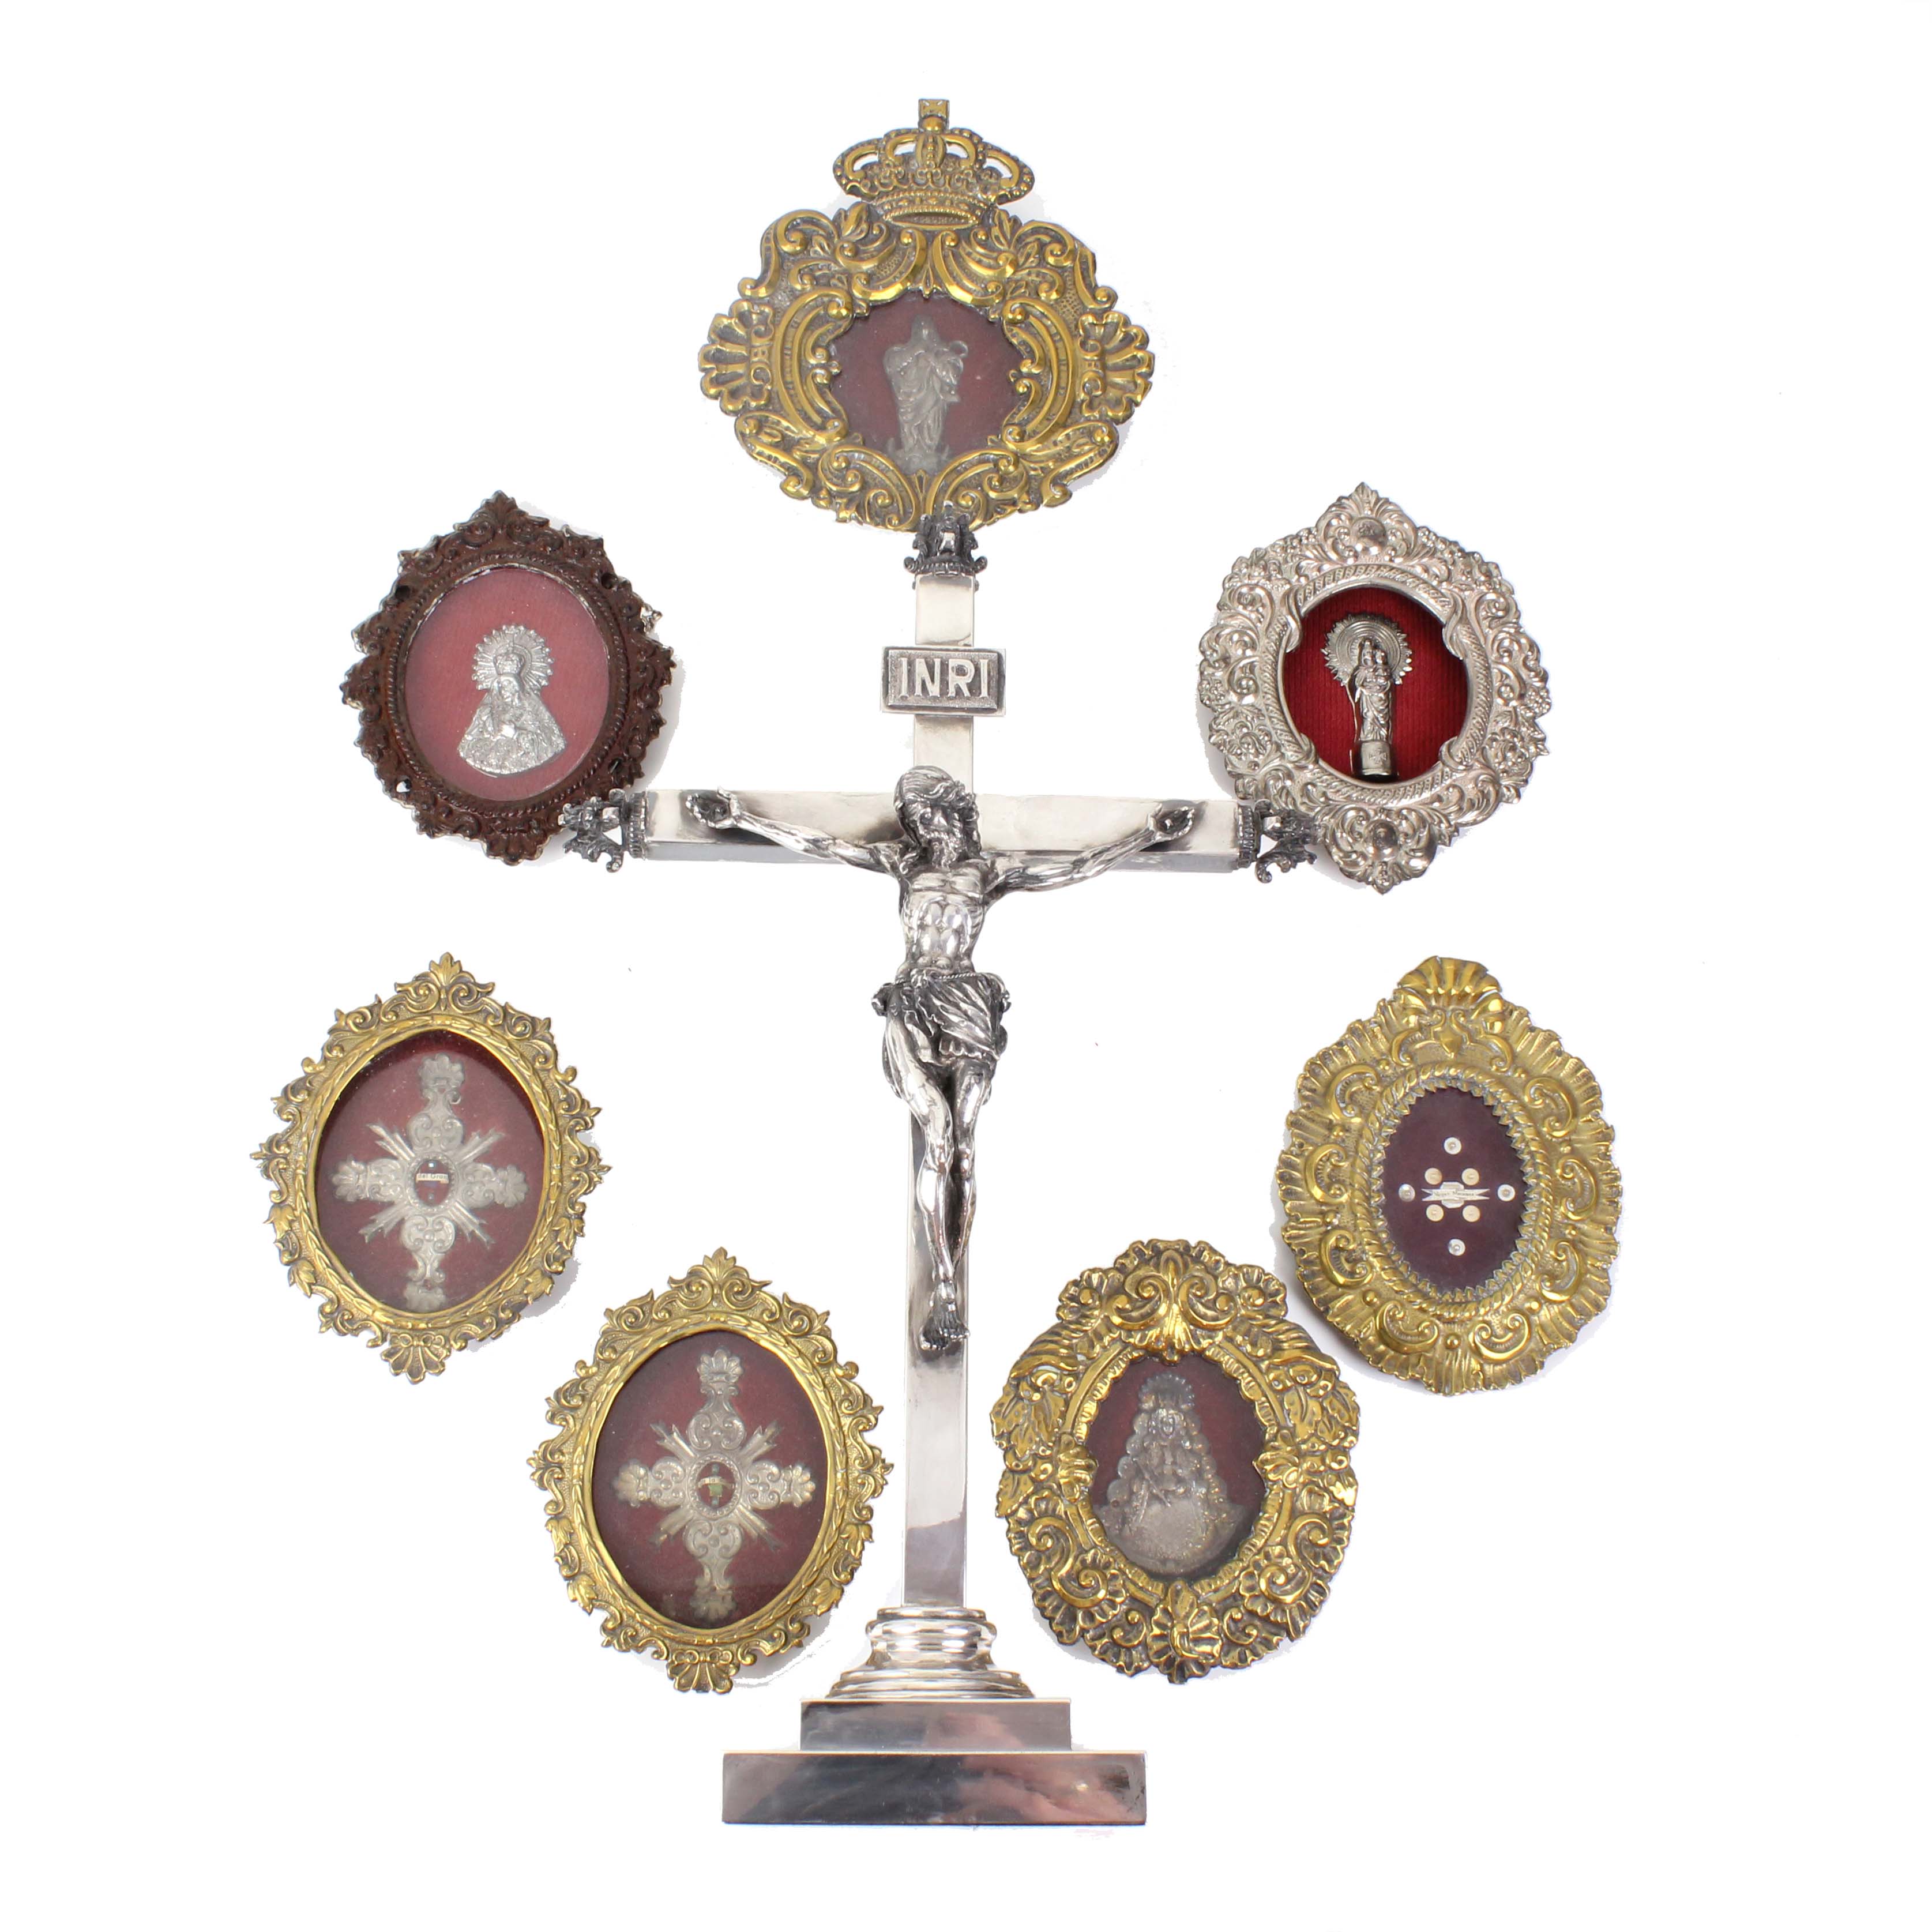 SILVER CRUCIFIX AND RELIGIOUS OBJECTS, C20th.